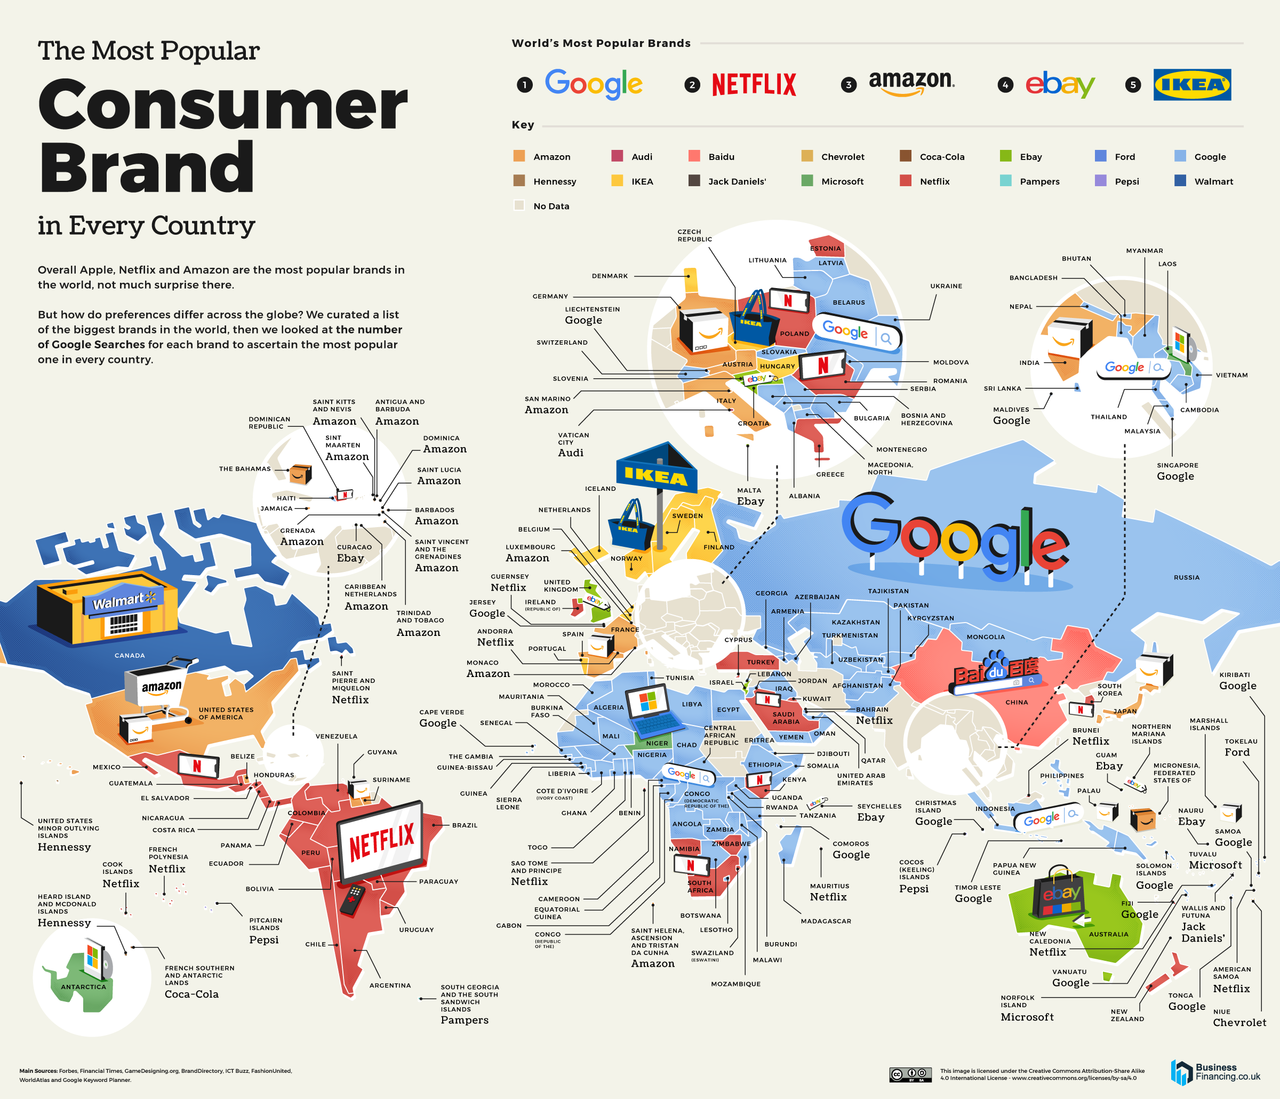 01_Most-Popular-Consumer-Brand-in-Every-Country_World.png